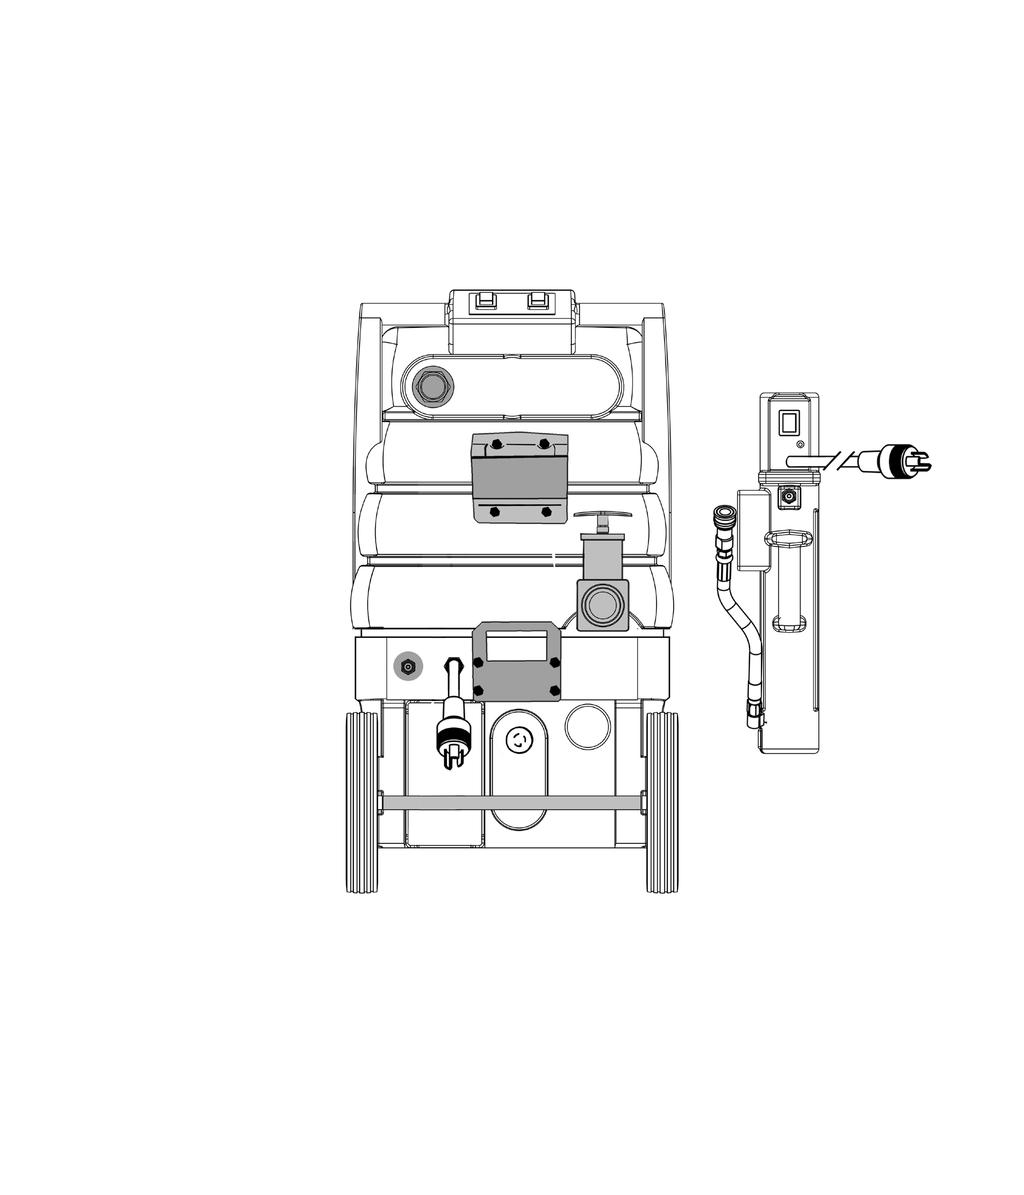 300BX-EH MACHINE OVERVIEW. Handle- Used to maneuver and position the 300BX- EH. Contains switch box (for switchbox, see #).. Recovery tank and lid- Tank collects recovered waste water.